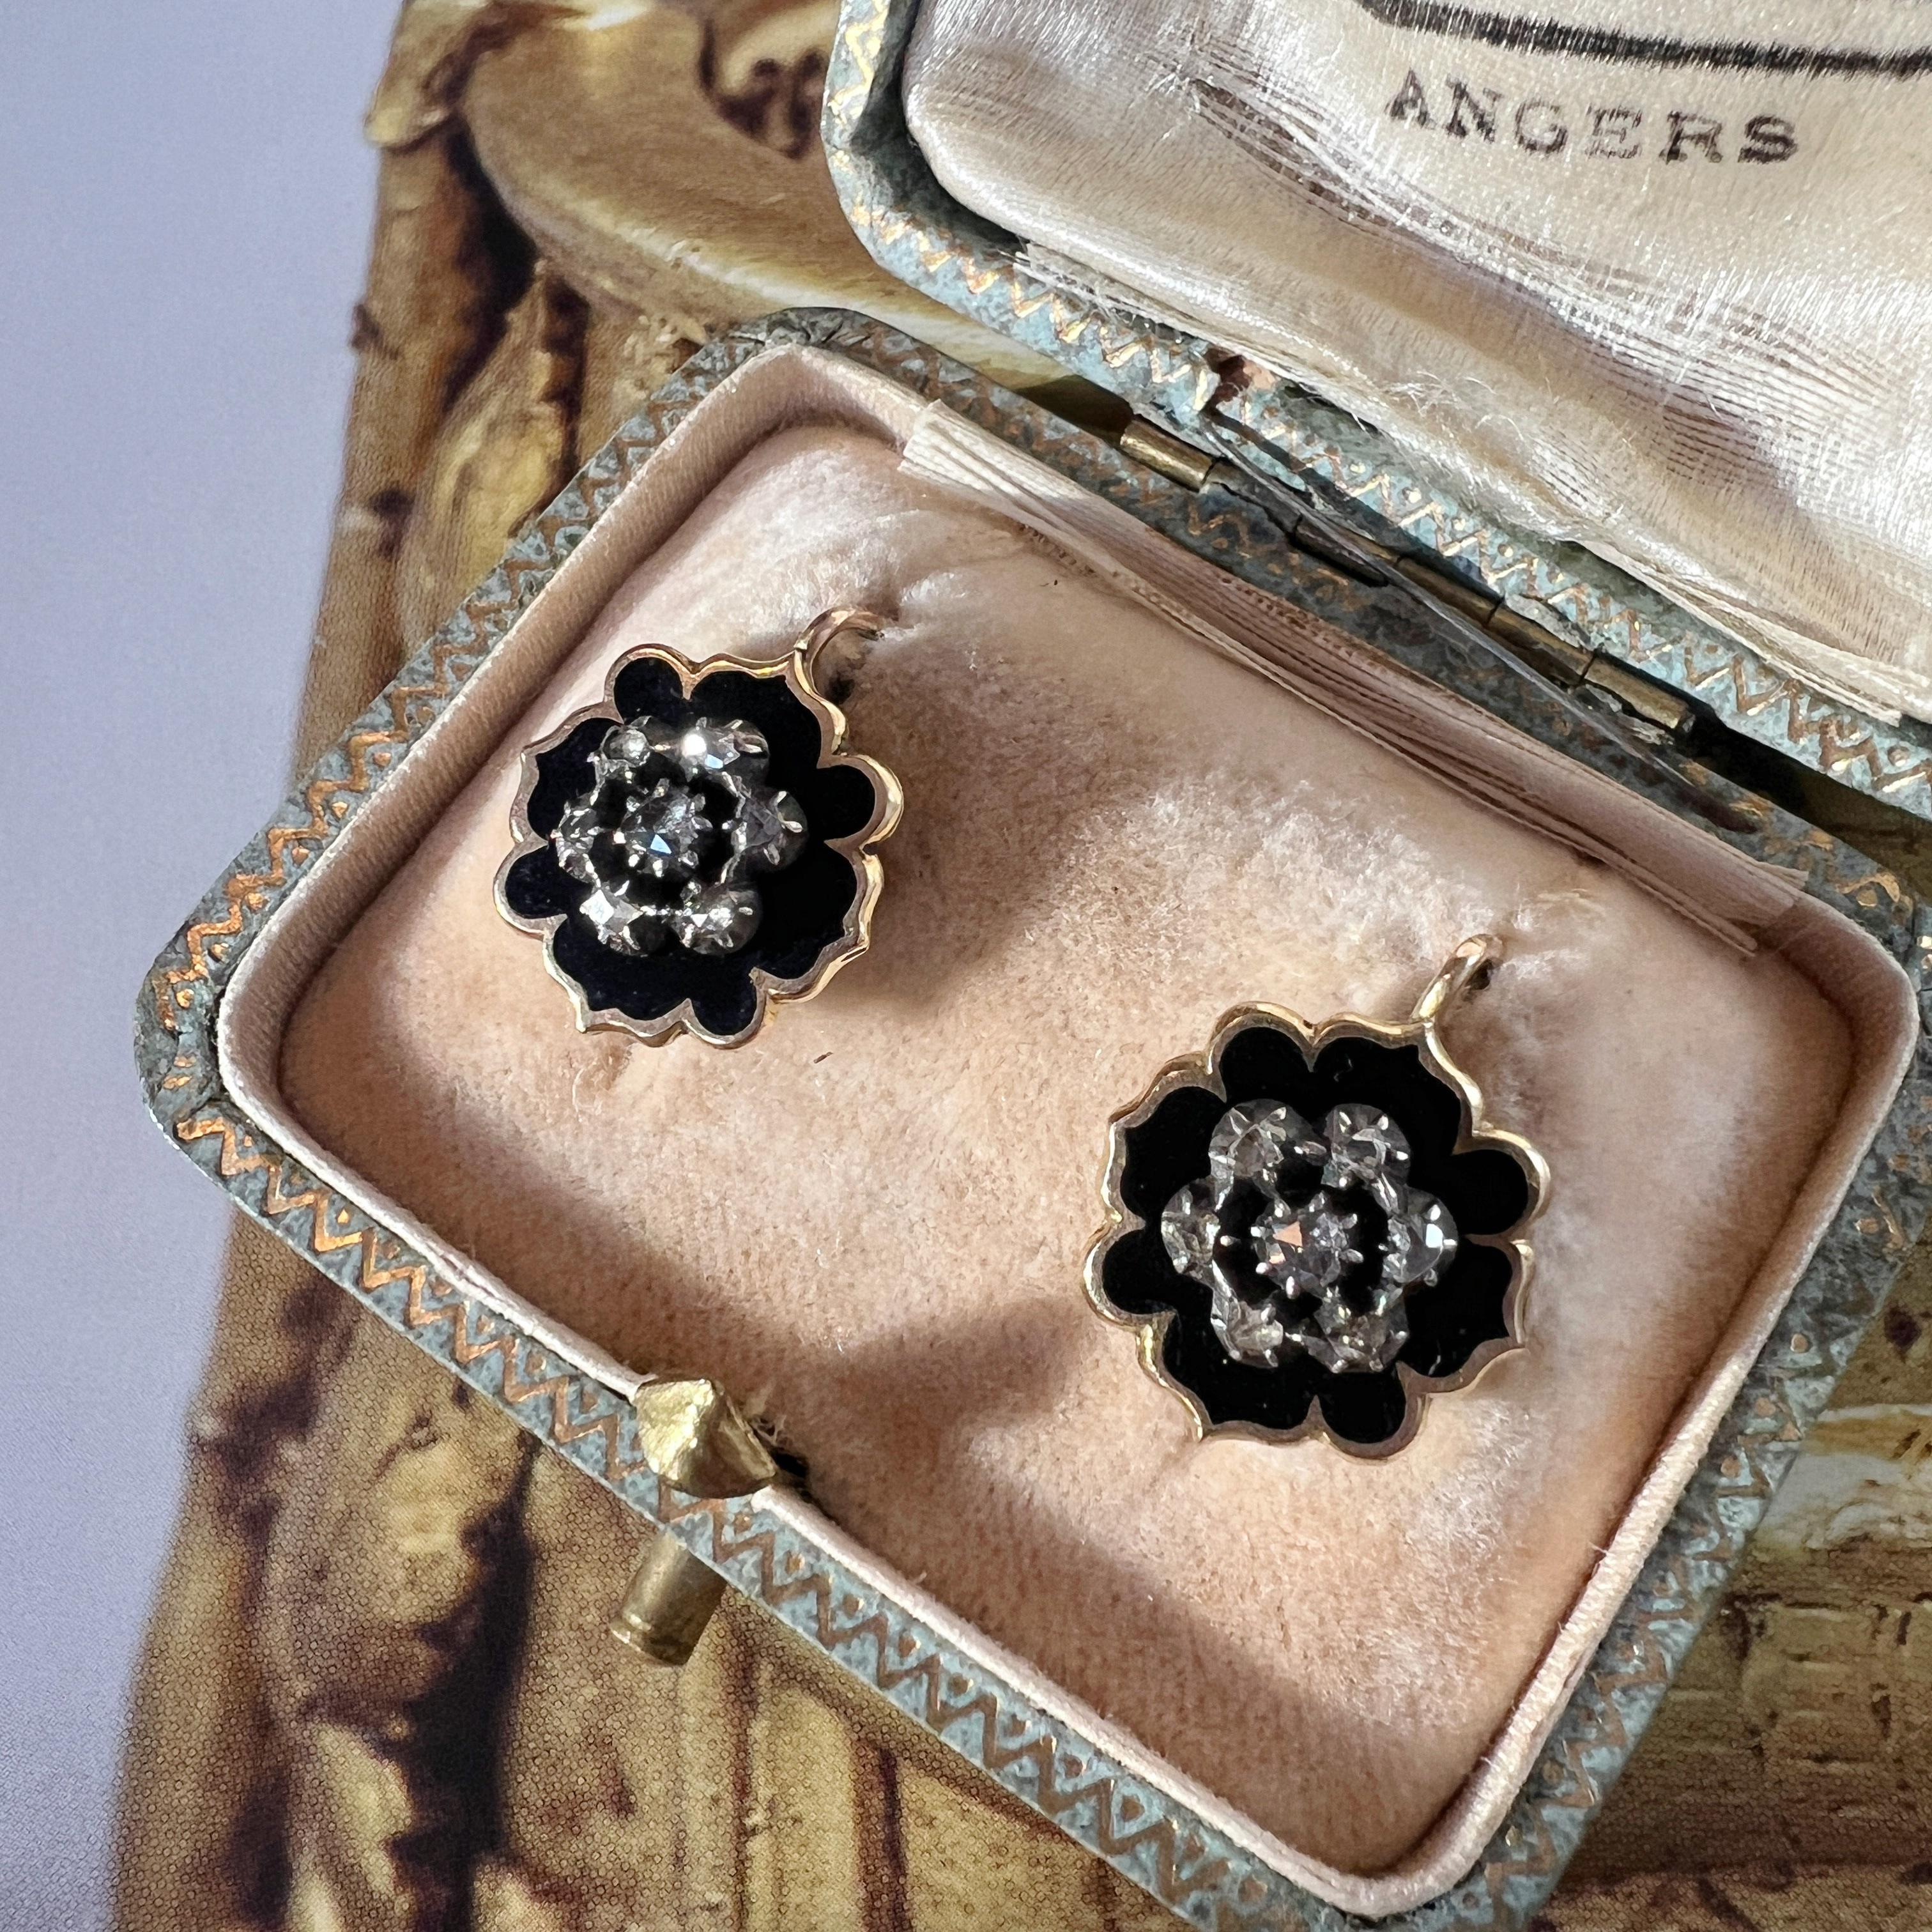 For sale a beautiful pair of 19th-century, Victorian-era earrings, a true embodiment of timeless elegance.

Crafted in 18k gold, these dangle earrings feature a black enamel lotus flower panel, adorned with seven dazzling rose-cut diamonds on each